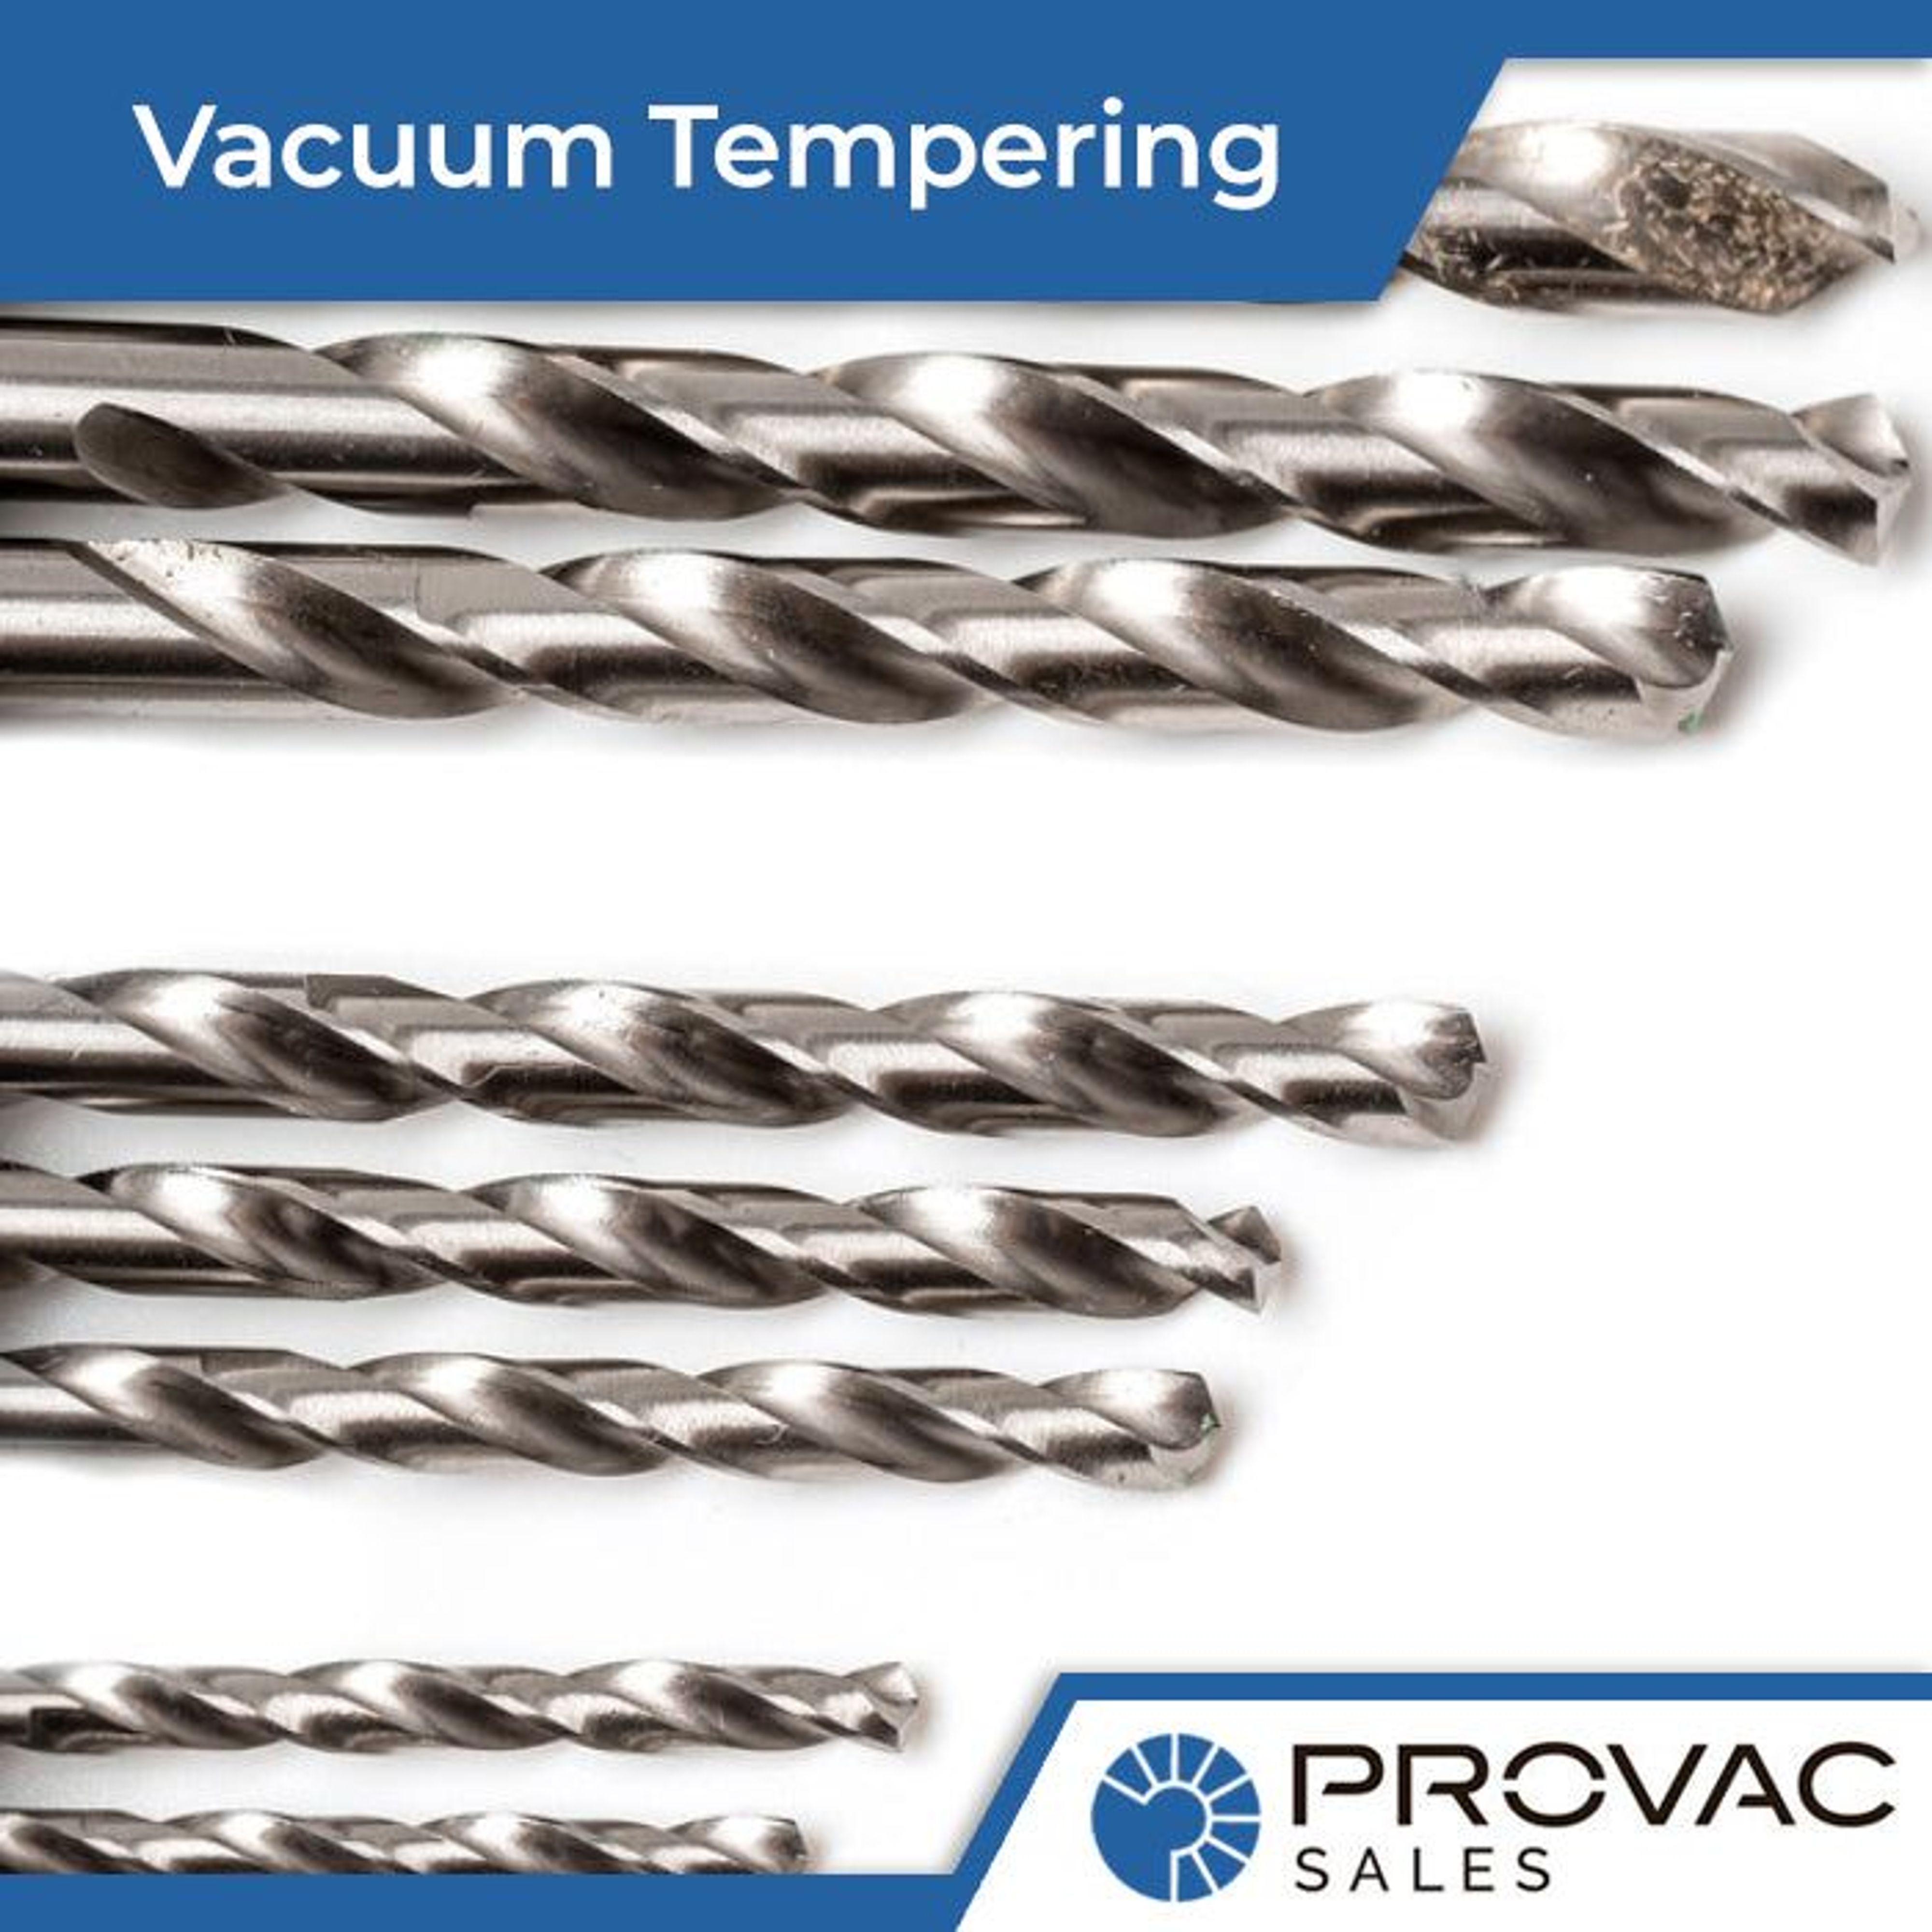 What is Vacuum Tempering? Background